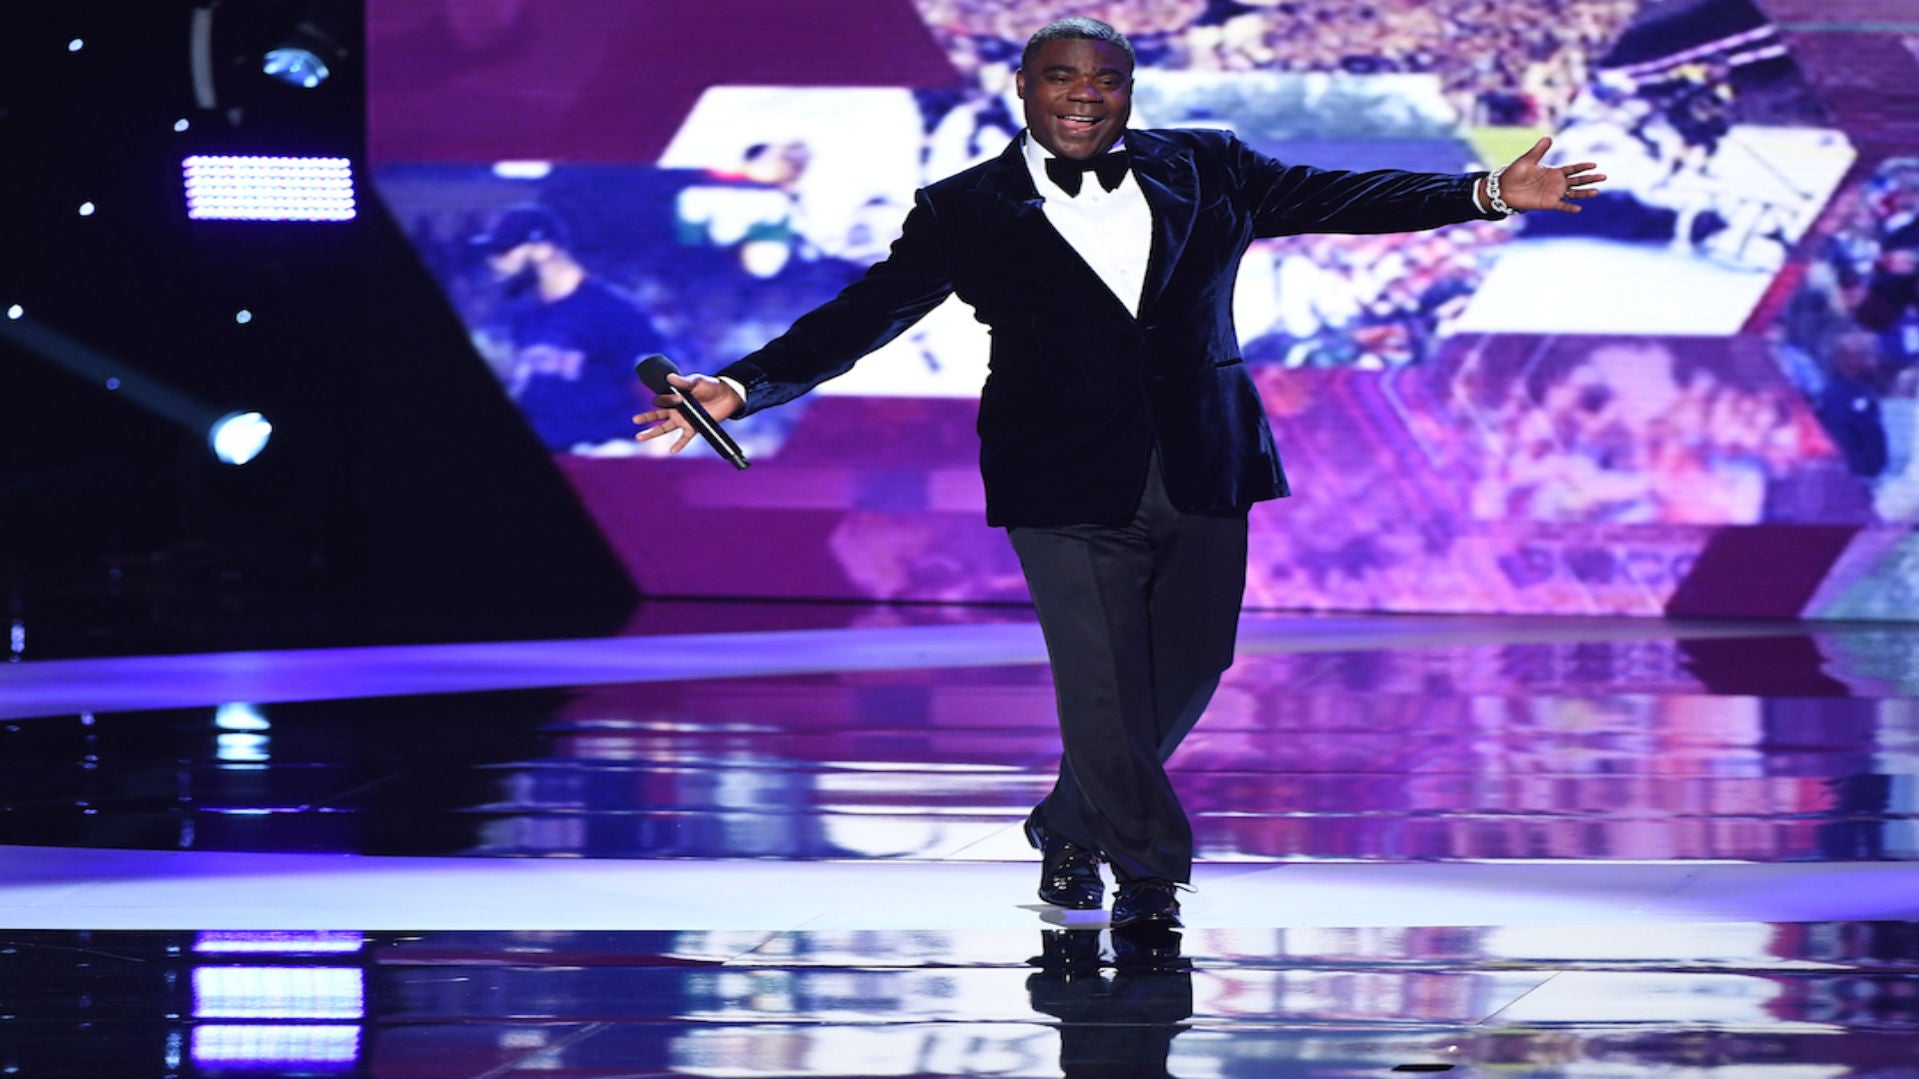 All The Moments You May Have Missed At The 2019 ESPY Awards